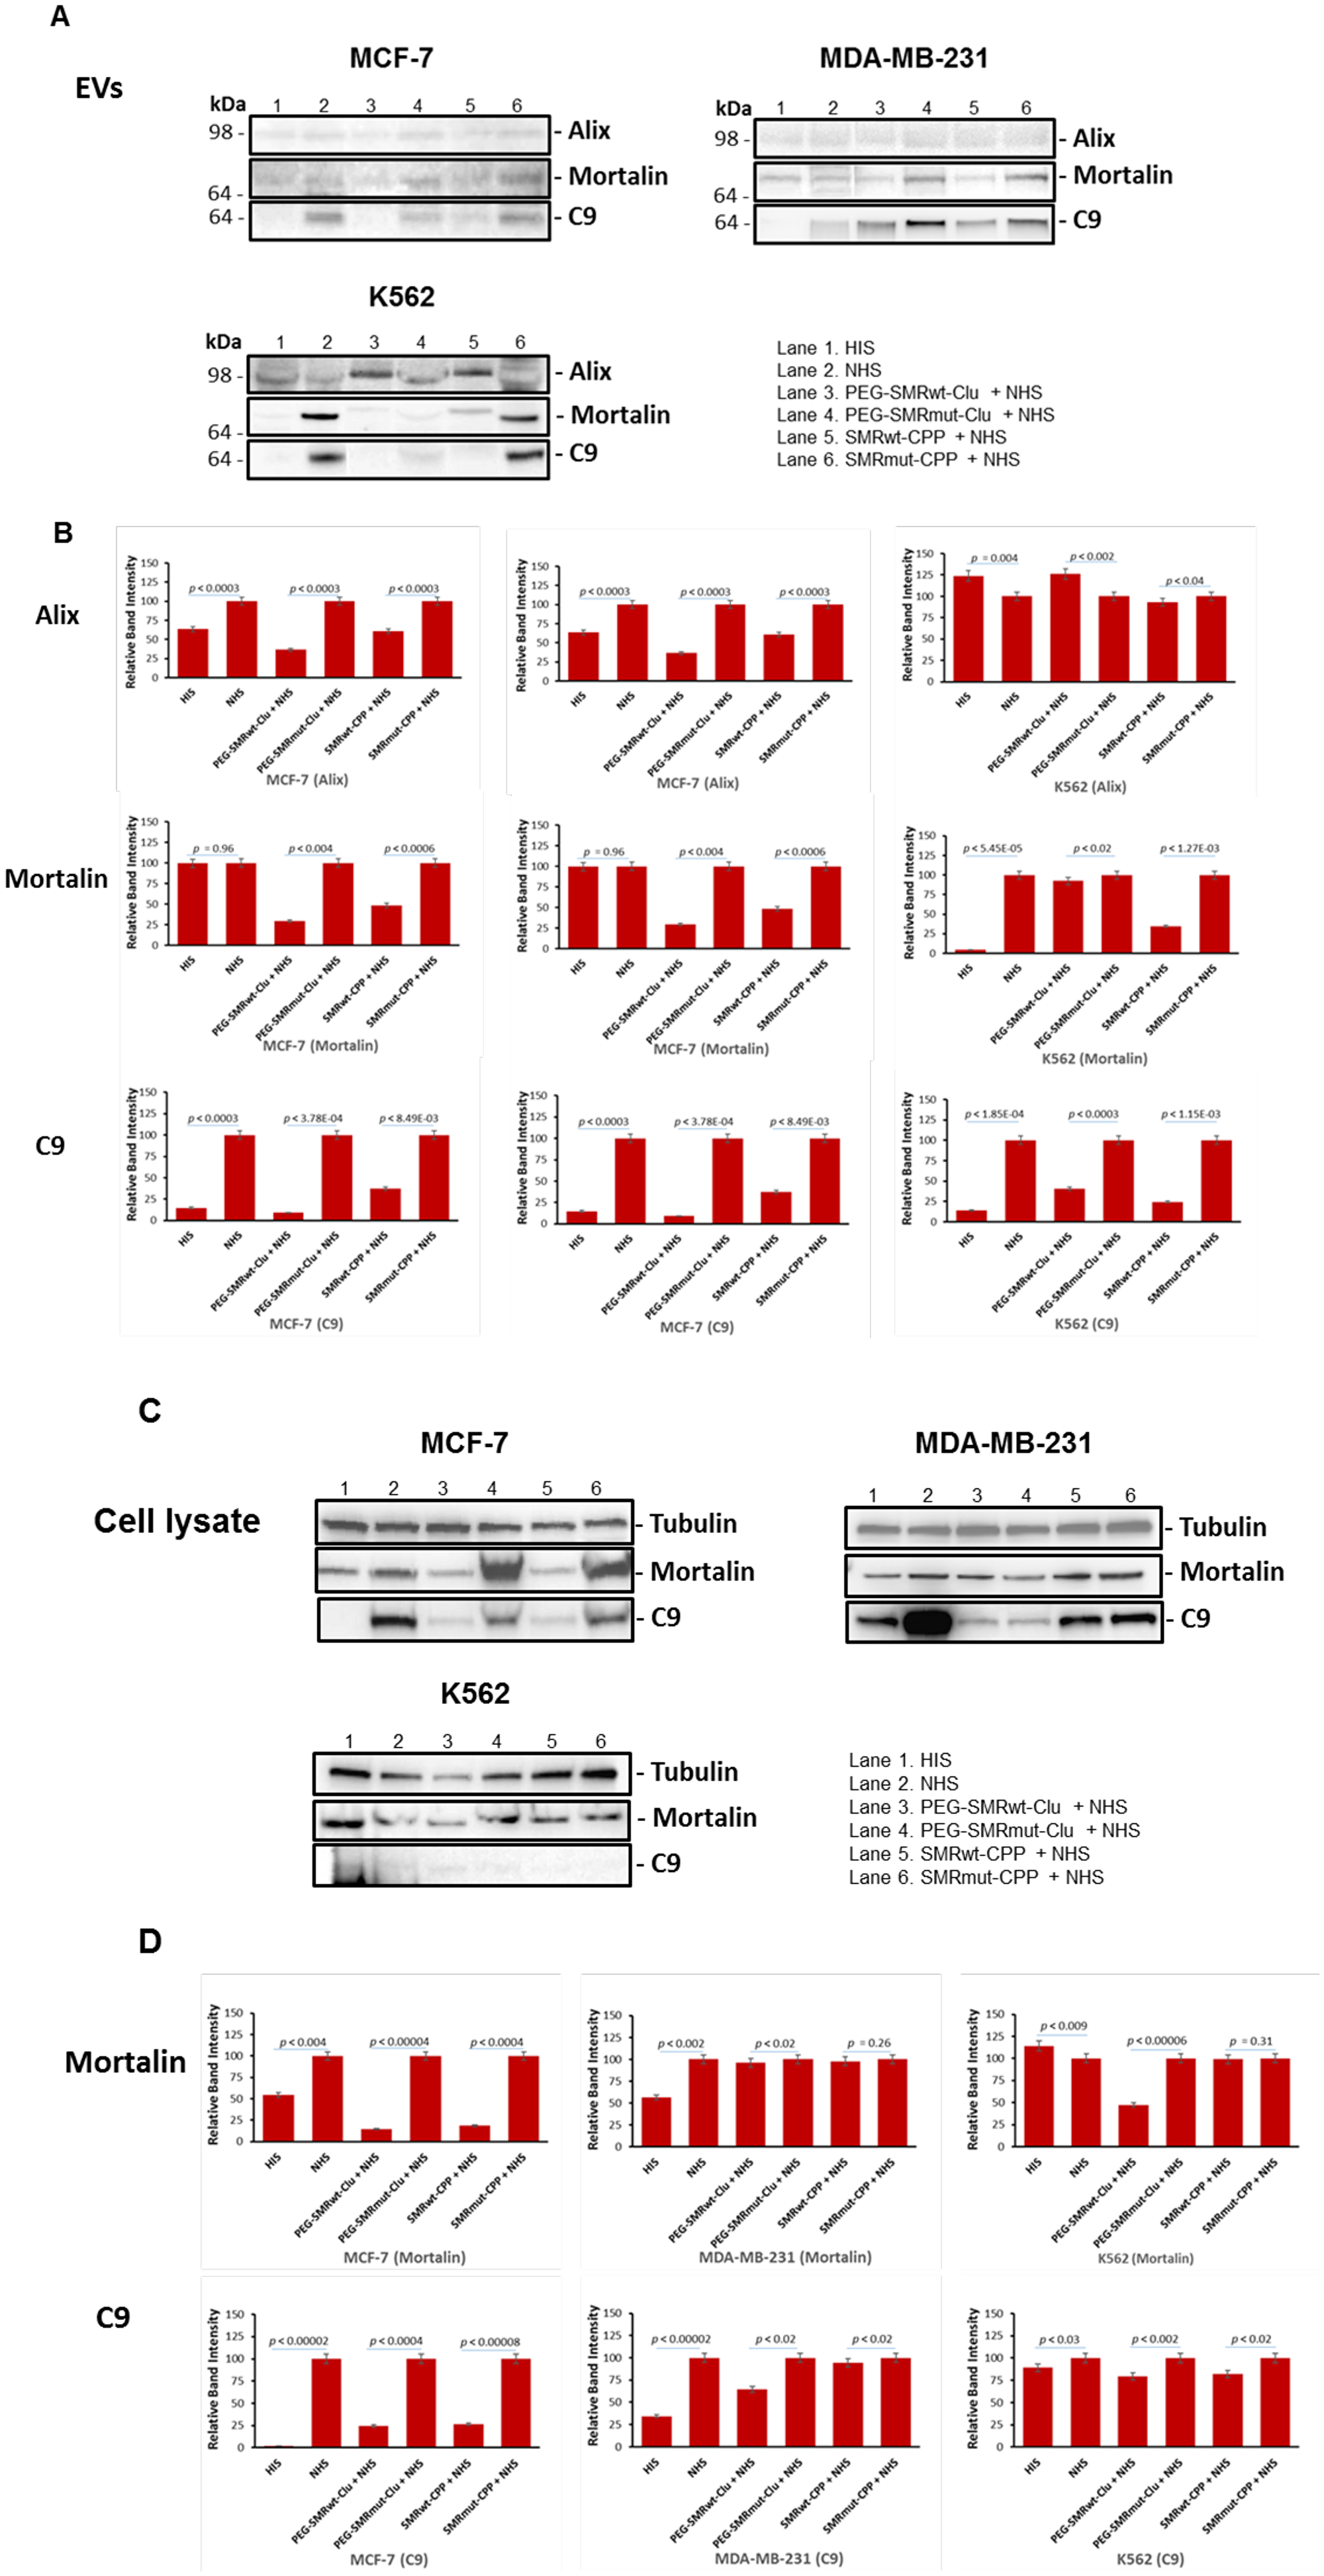 Levels of mortalin and C9 in extracellular vesicles and cell lysates from MCF-7, MDA-MB-231 and K562 cells were reduced after treatment with SMR peptides.